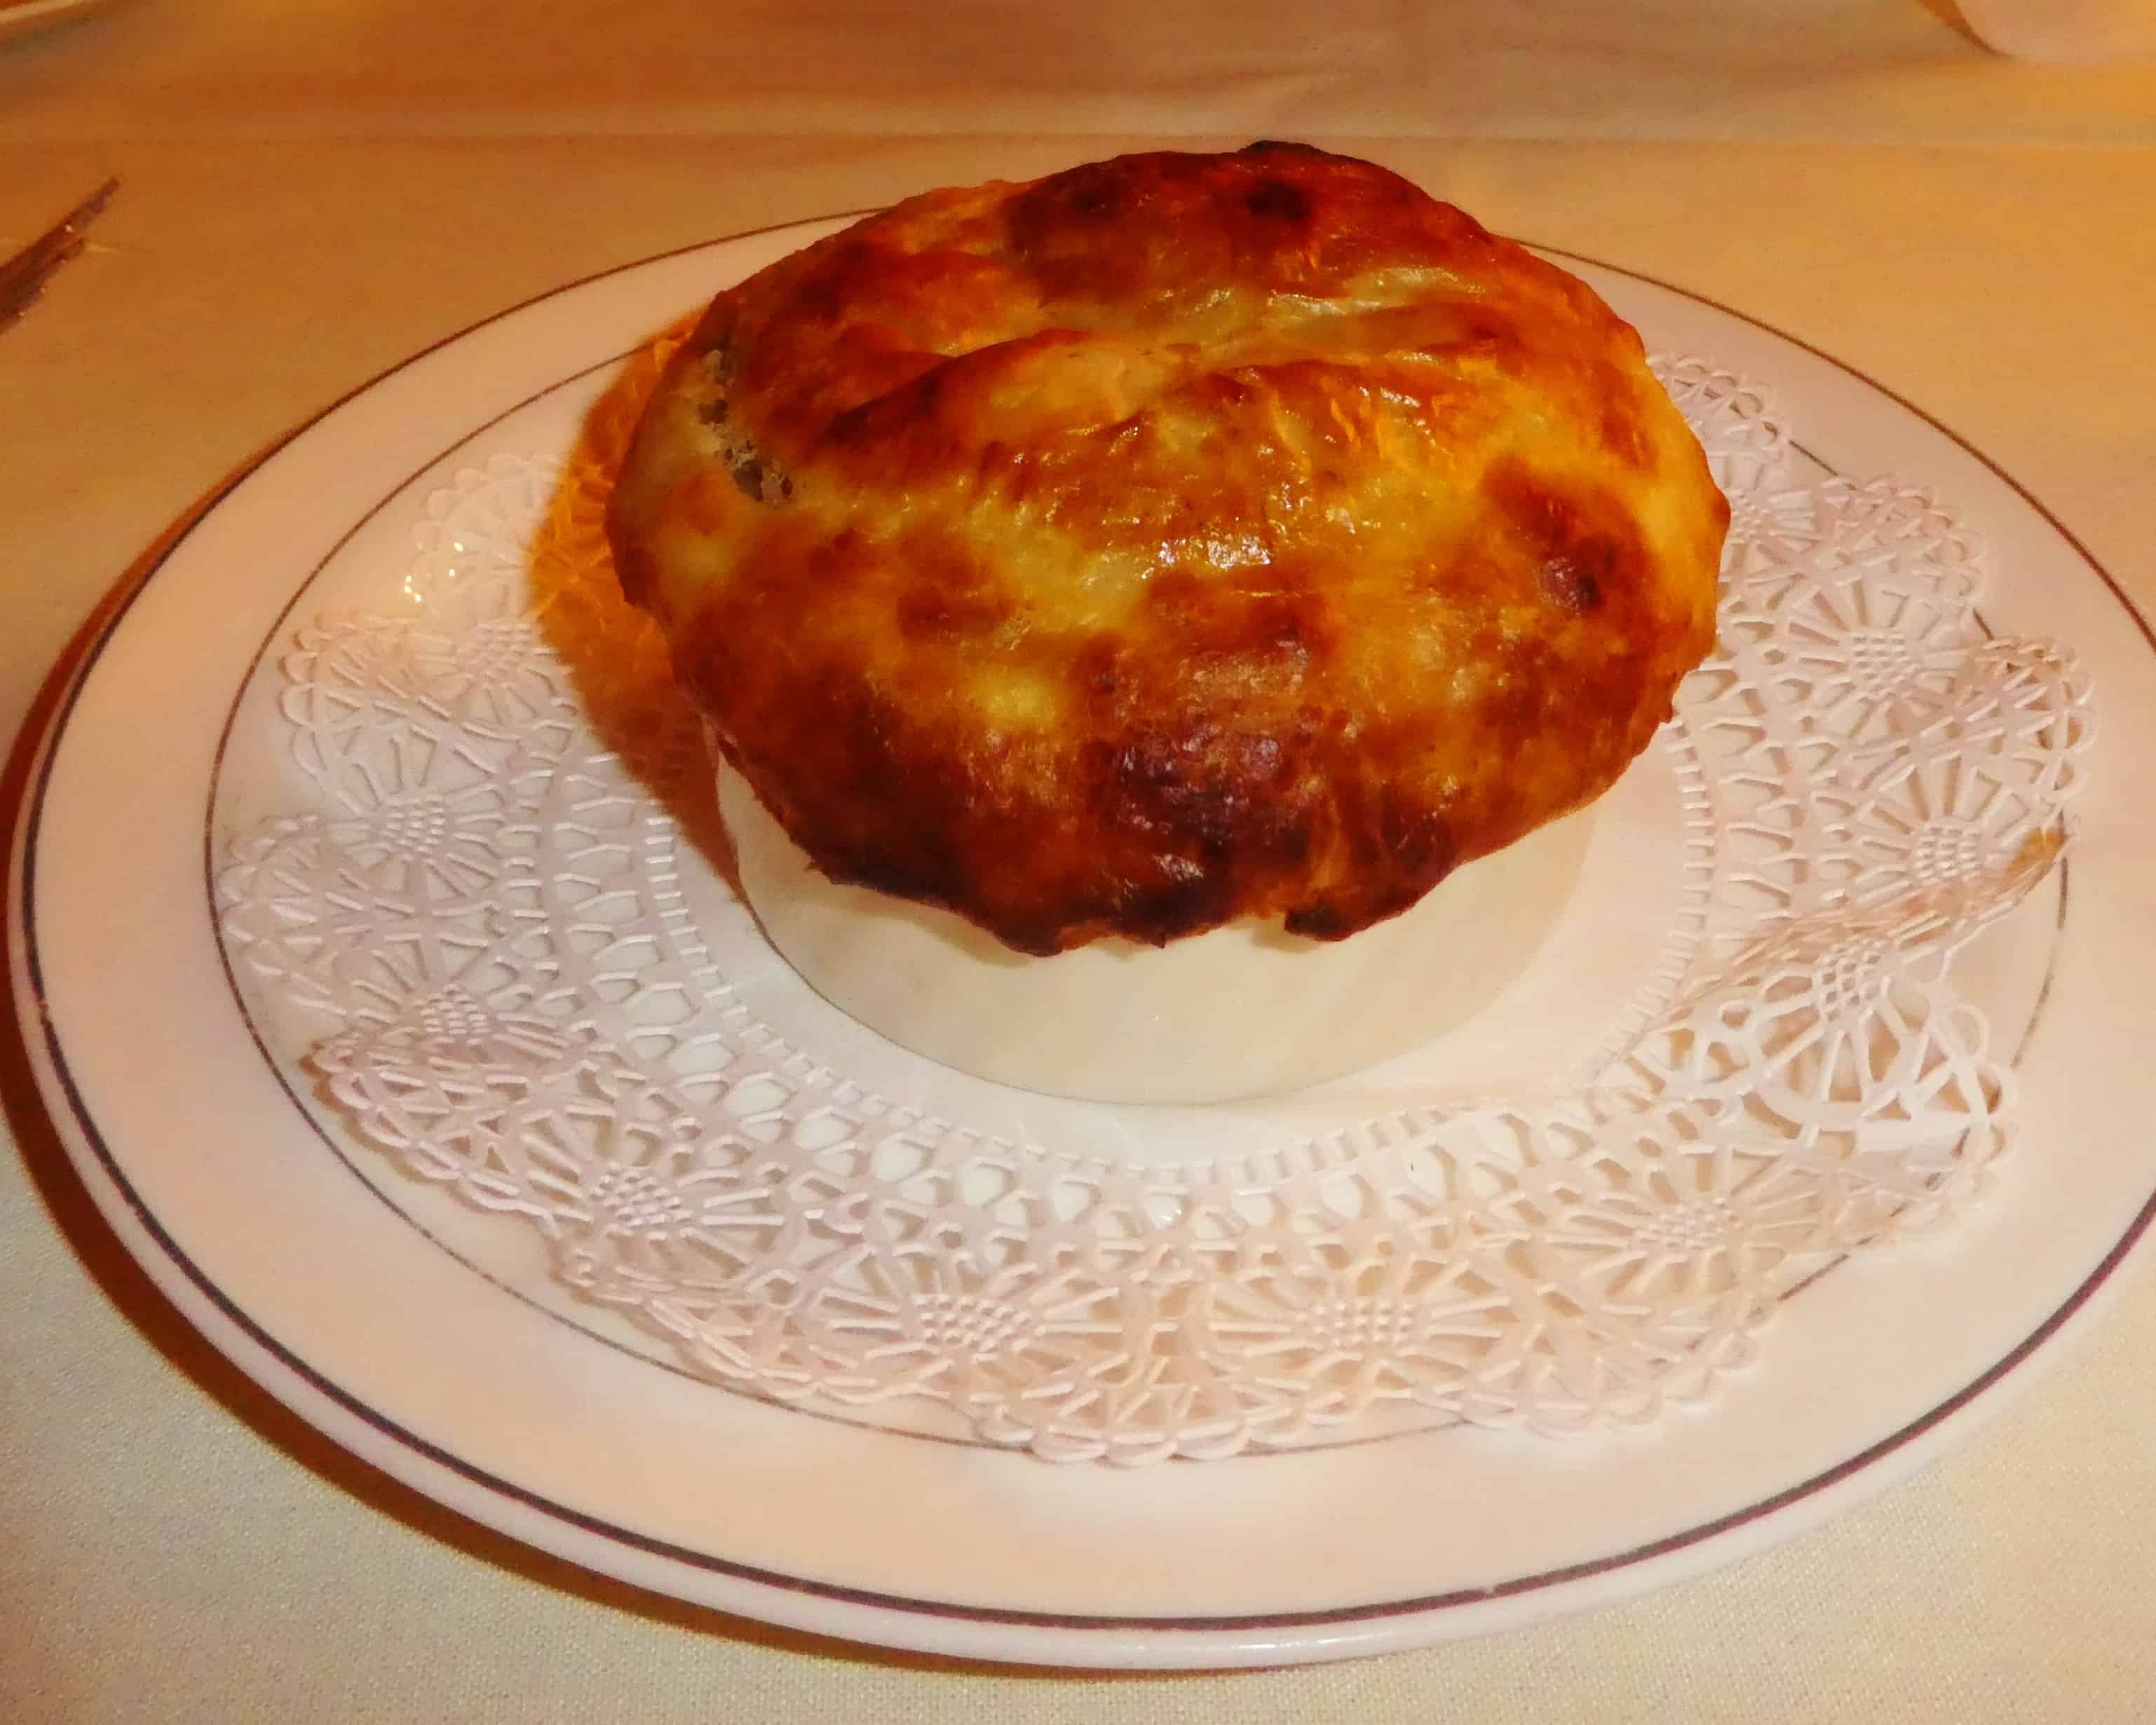 Escargot in Puff Pastry at Melvyn's Palm Springs